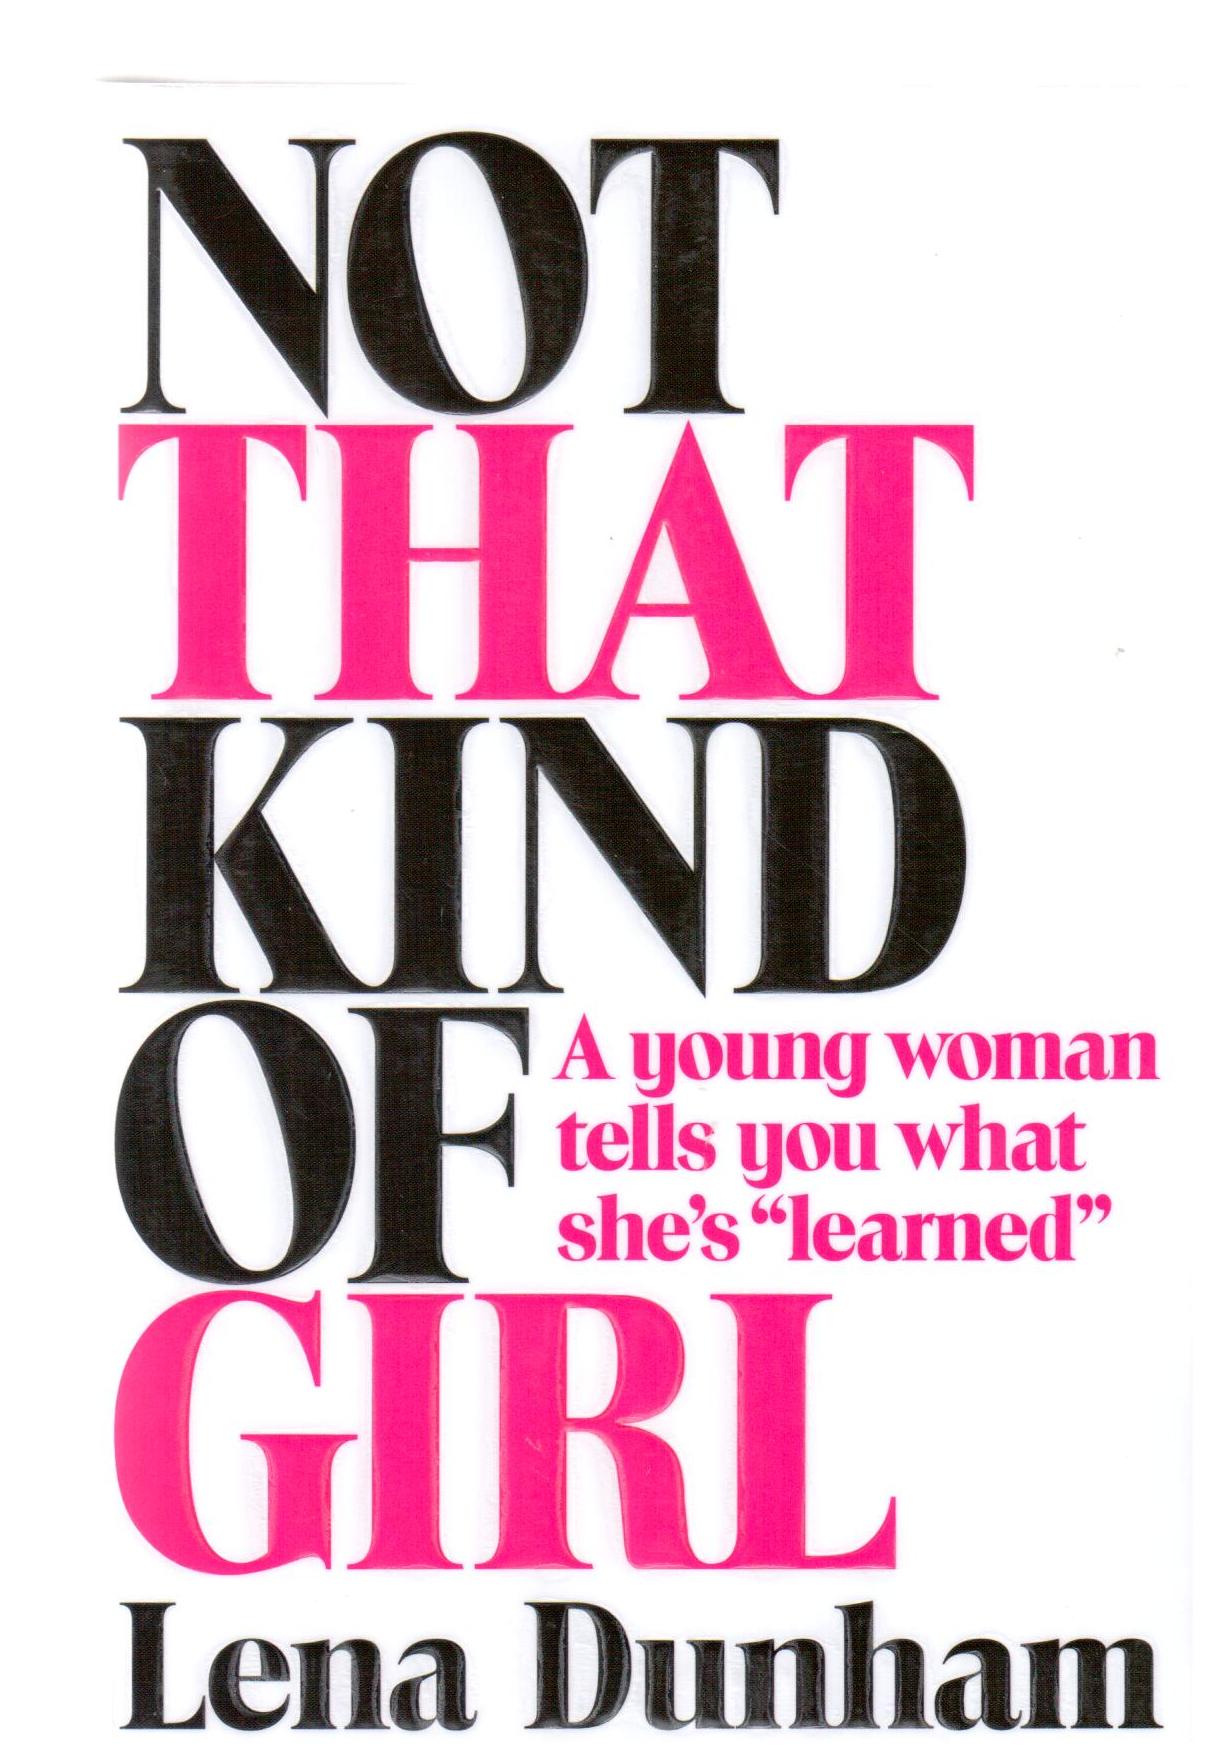 Not that kind of girl : a young woman tells you what she's "learned"